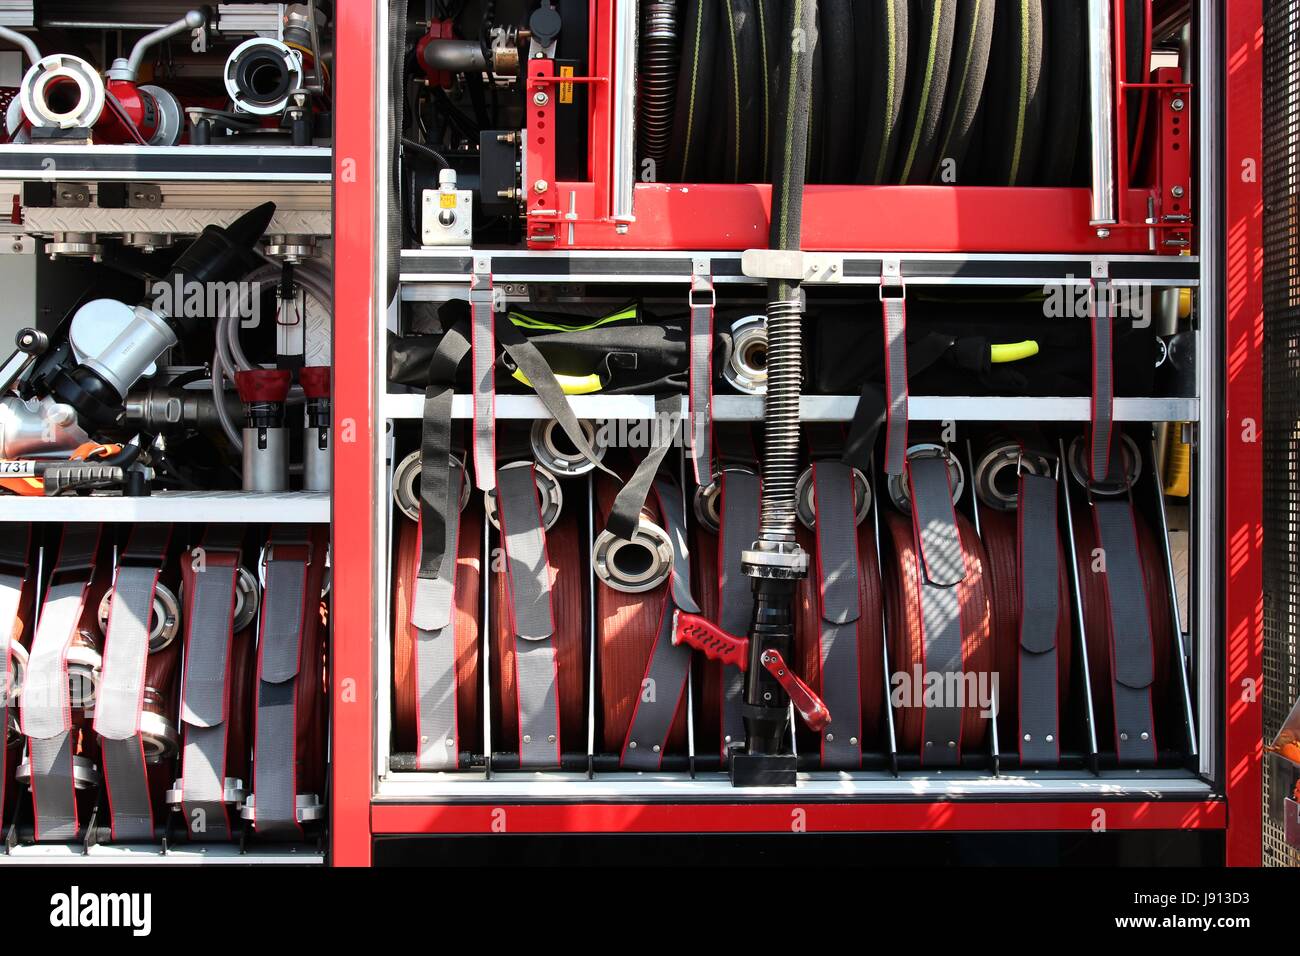 fire hoses on board a fire engine Stock Photo